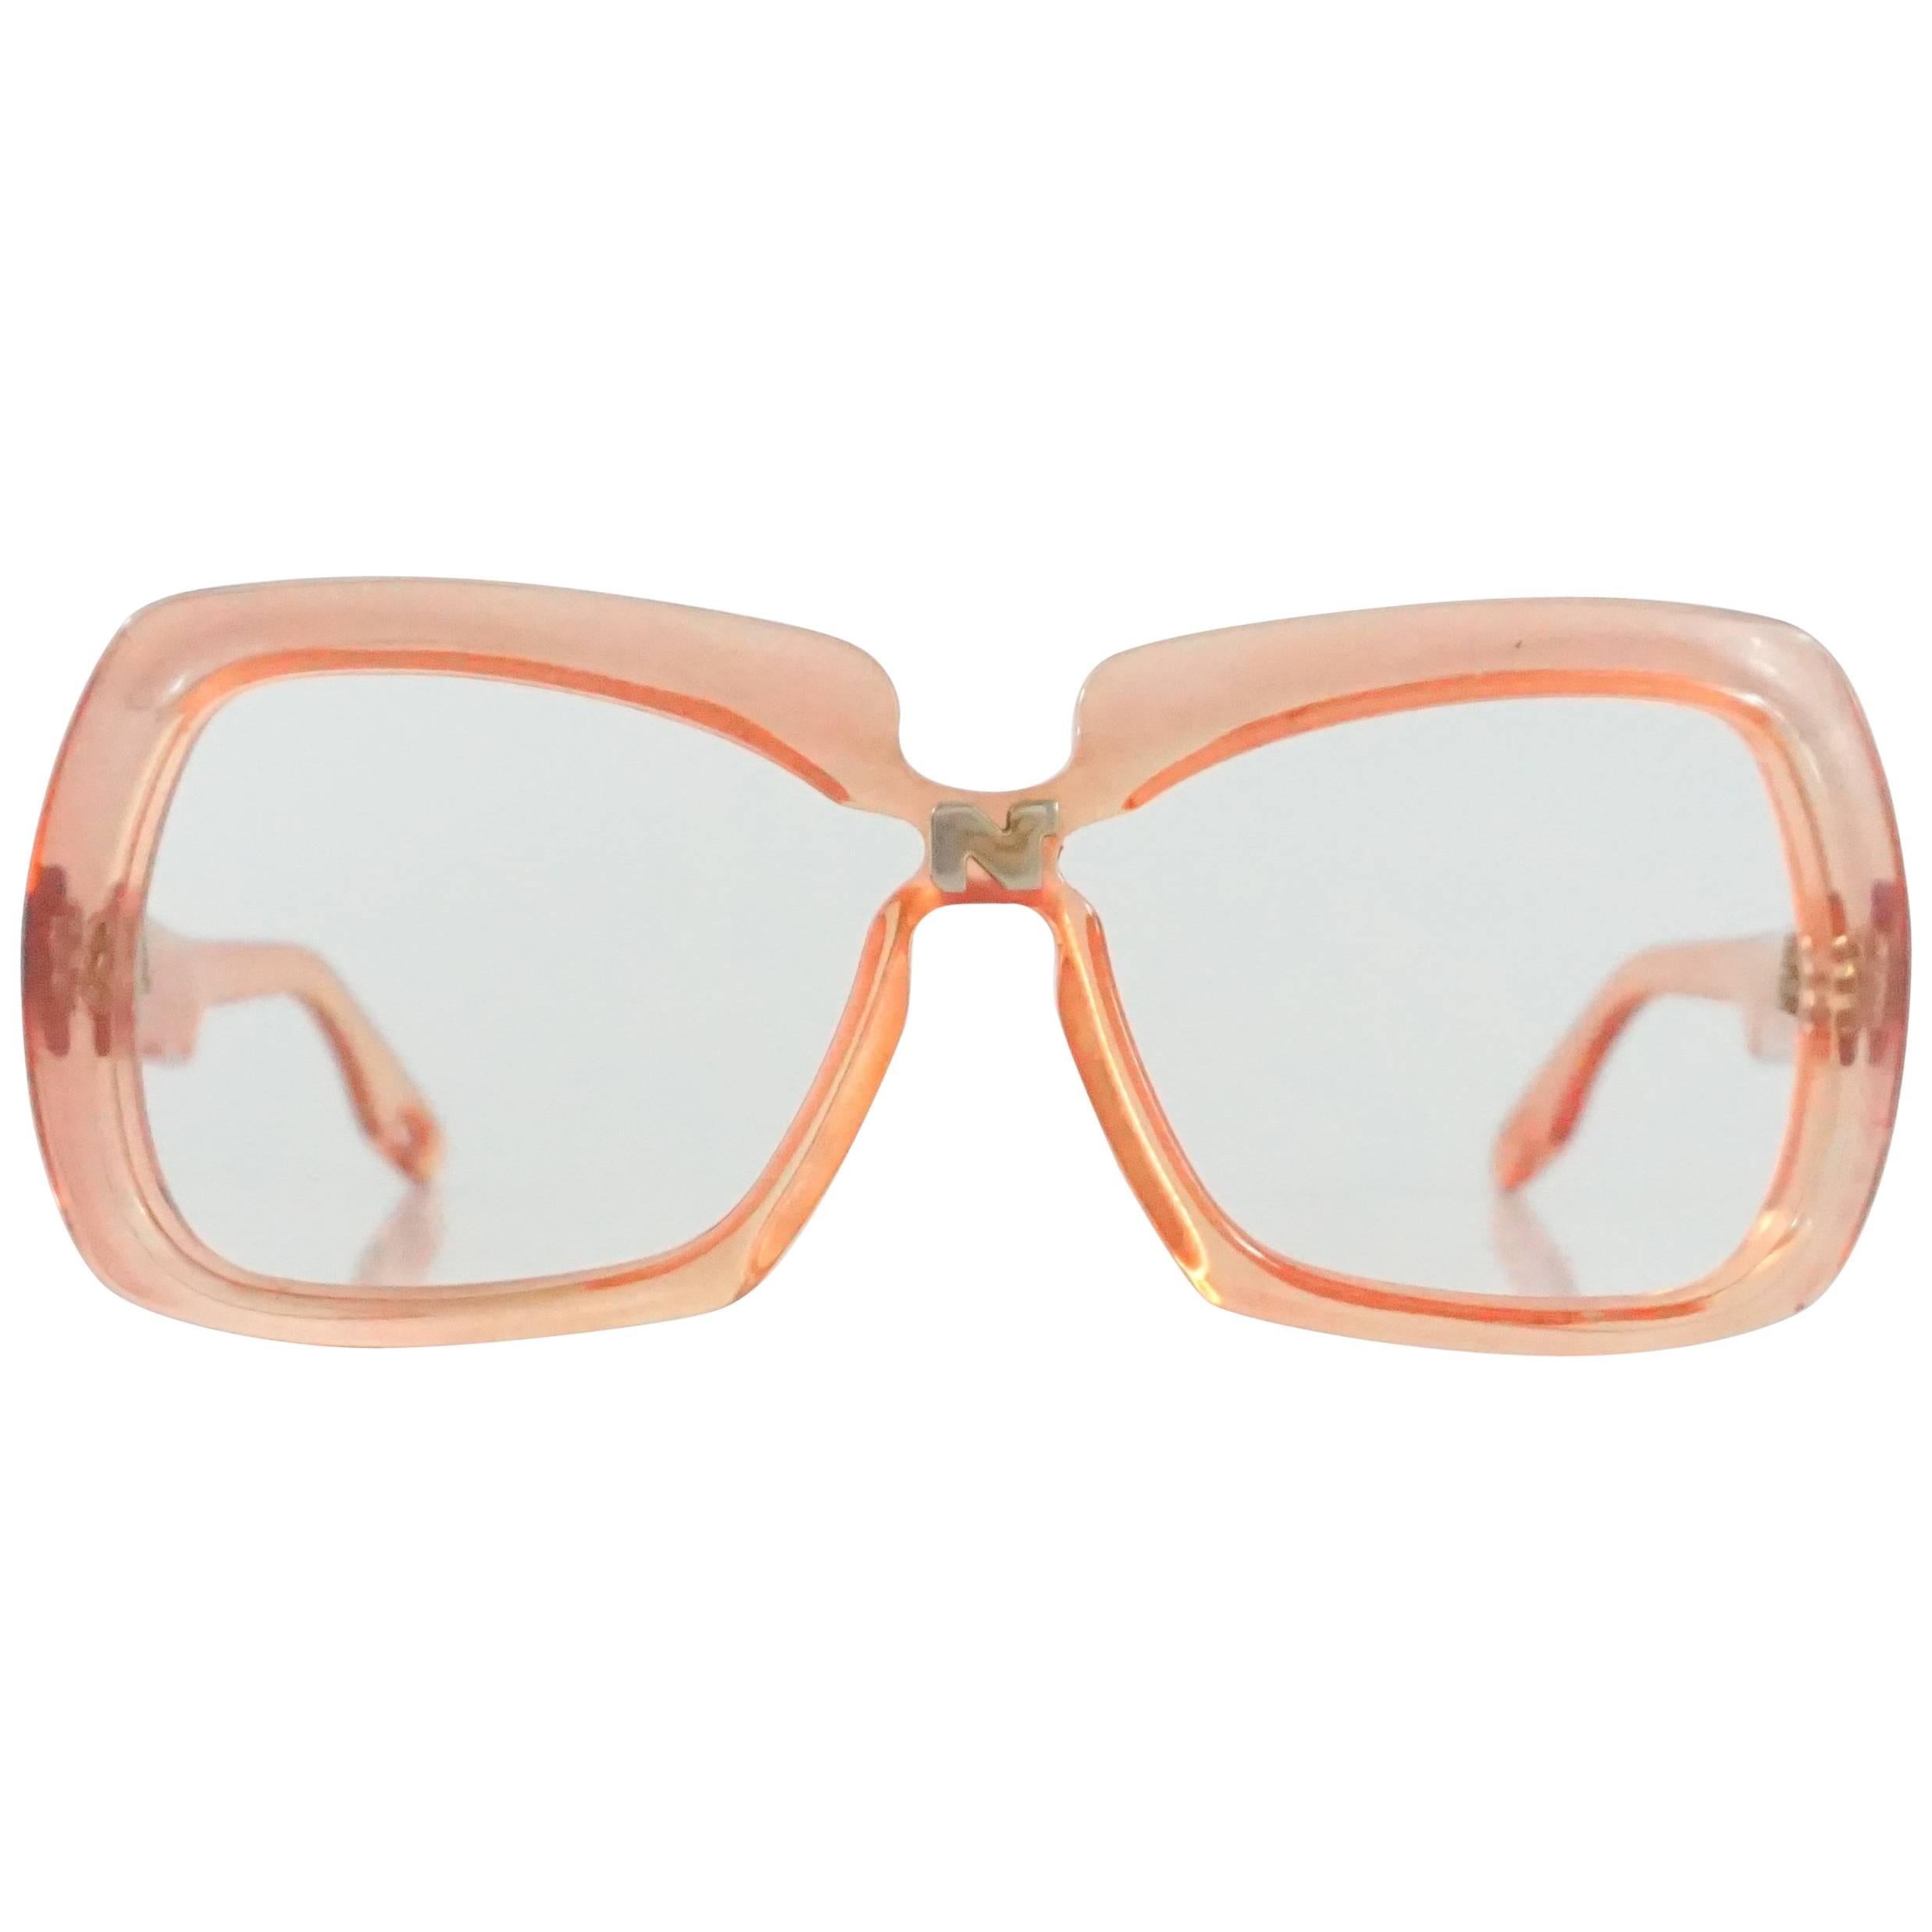 Nina Ricci Pink Lucite Square Frames - early 1970's 